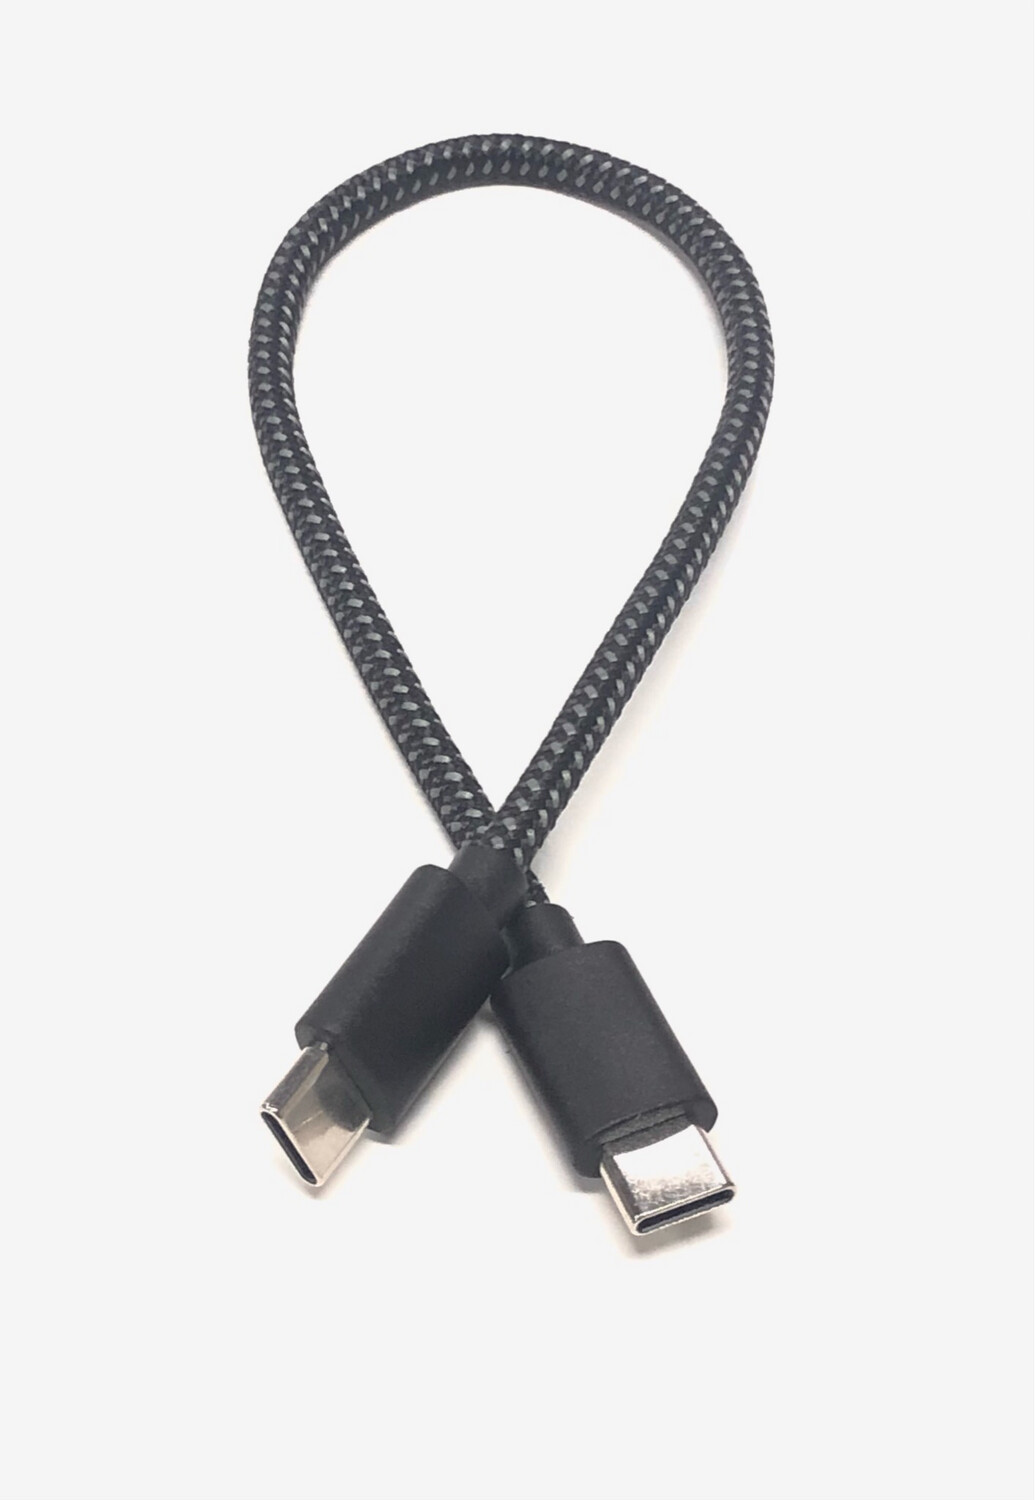 USB-C to USB-C cable, 25 cm